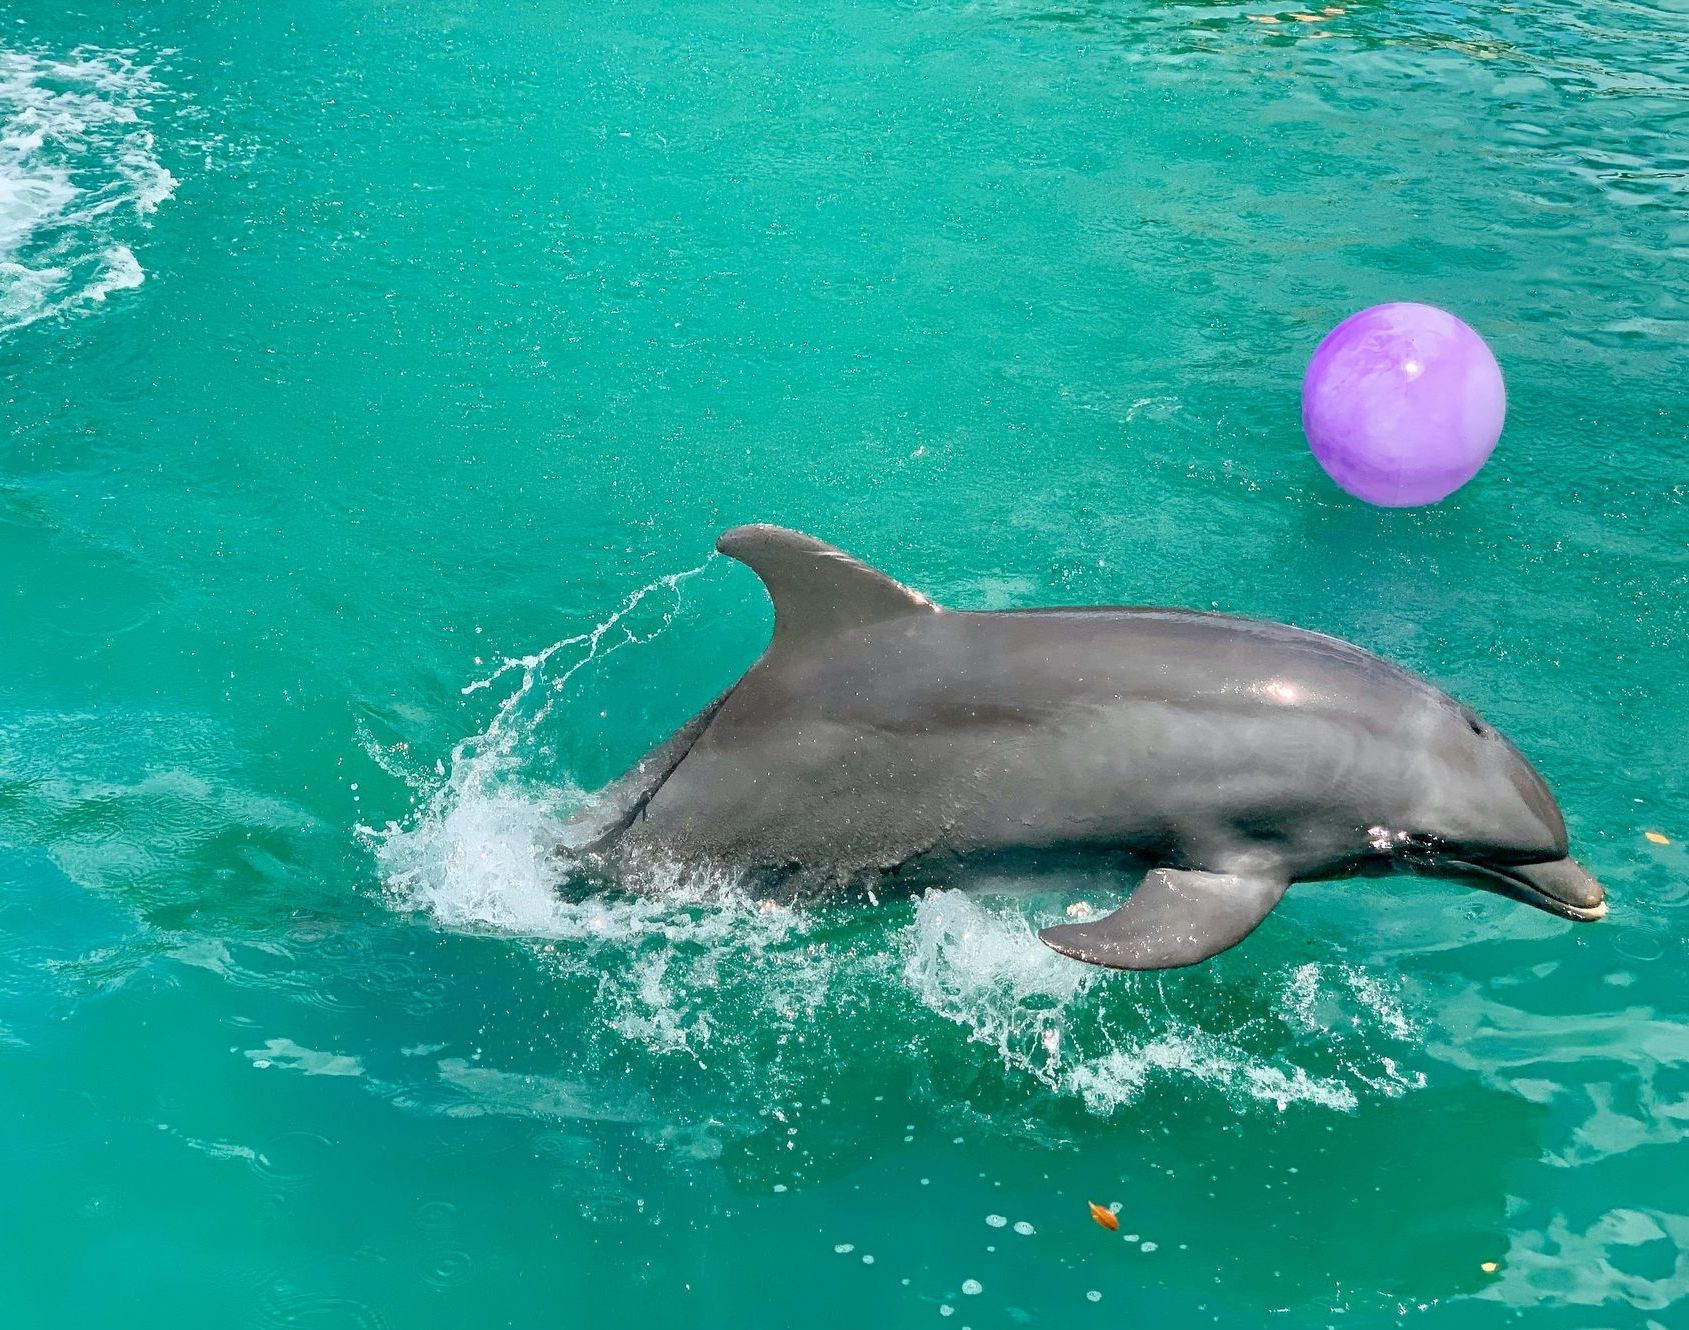 A dolphin is playing with a purple ball in the water